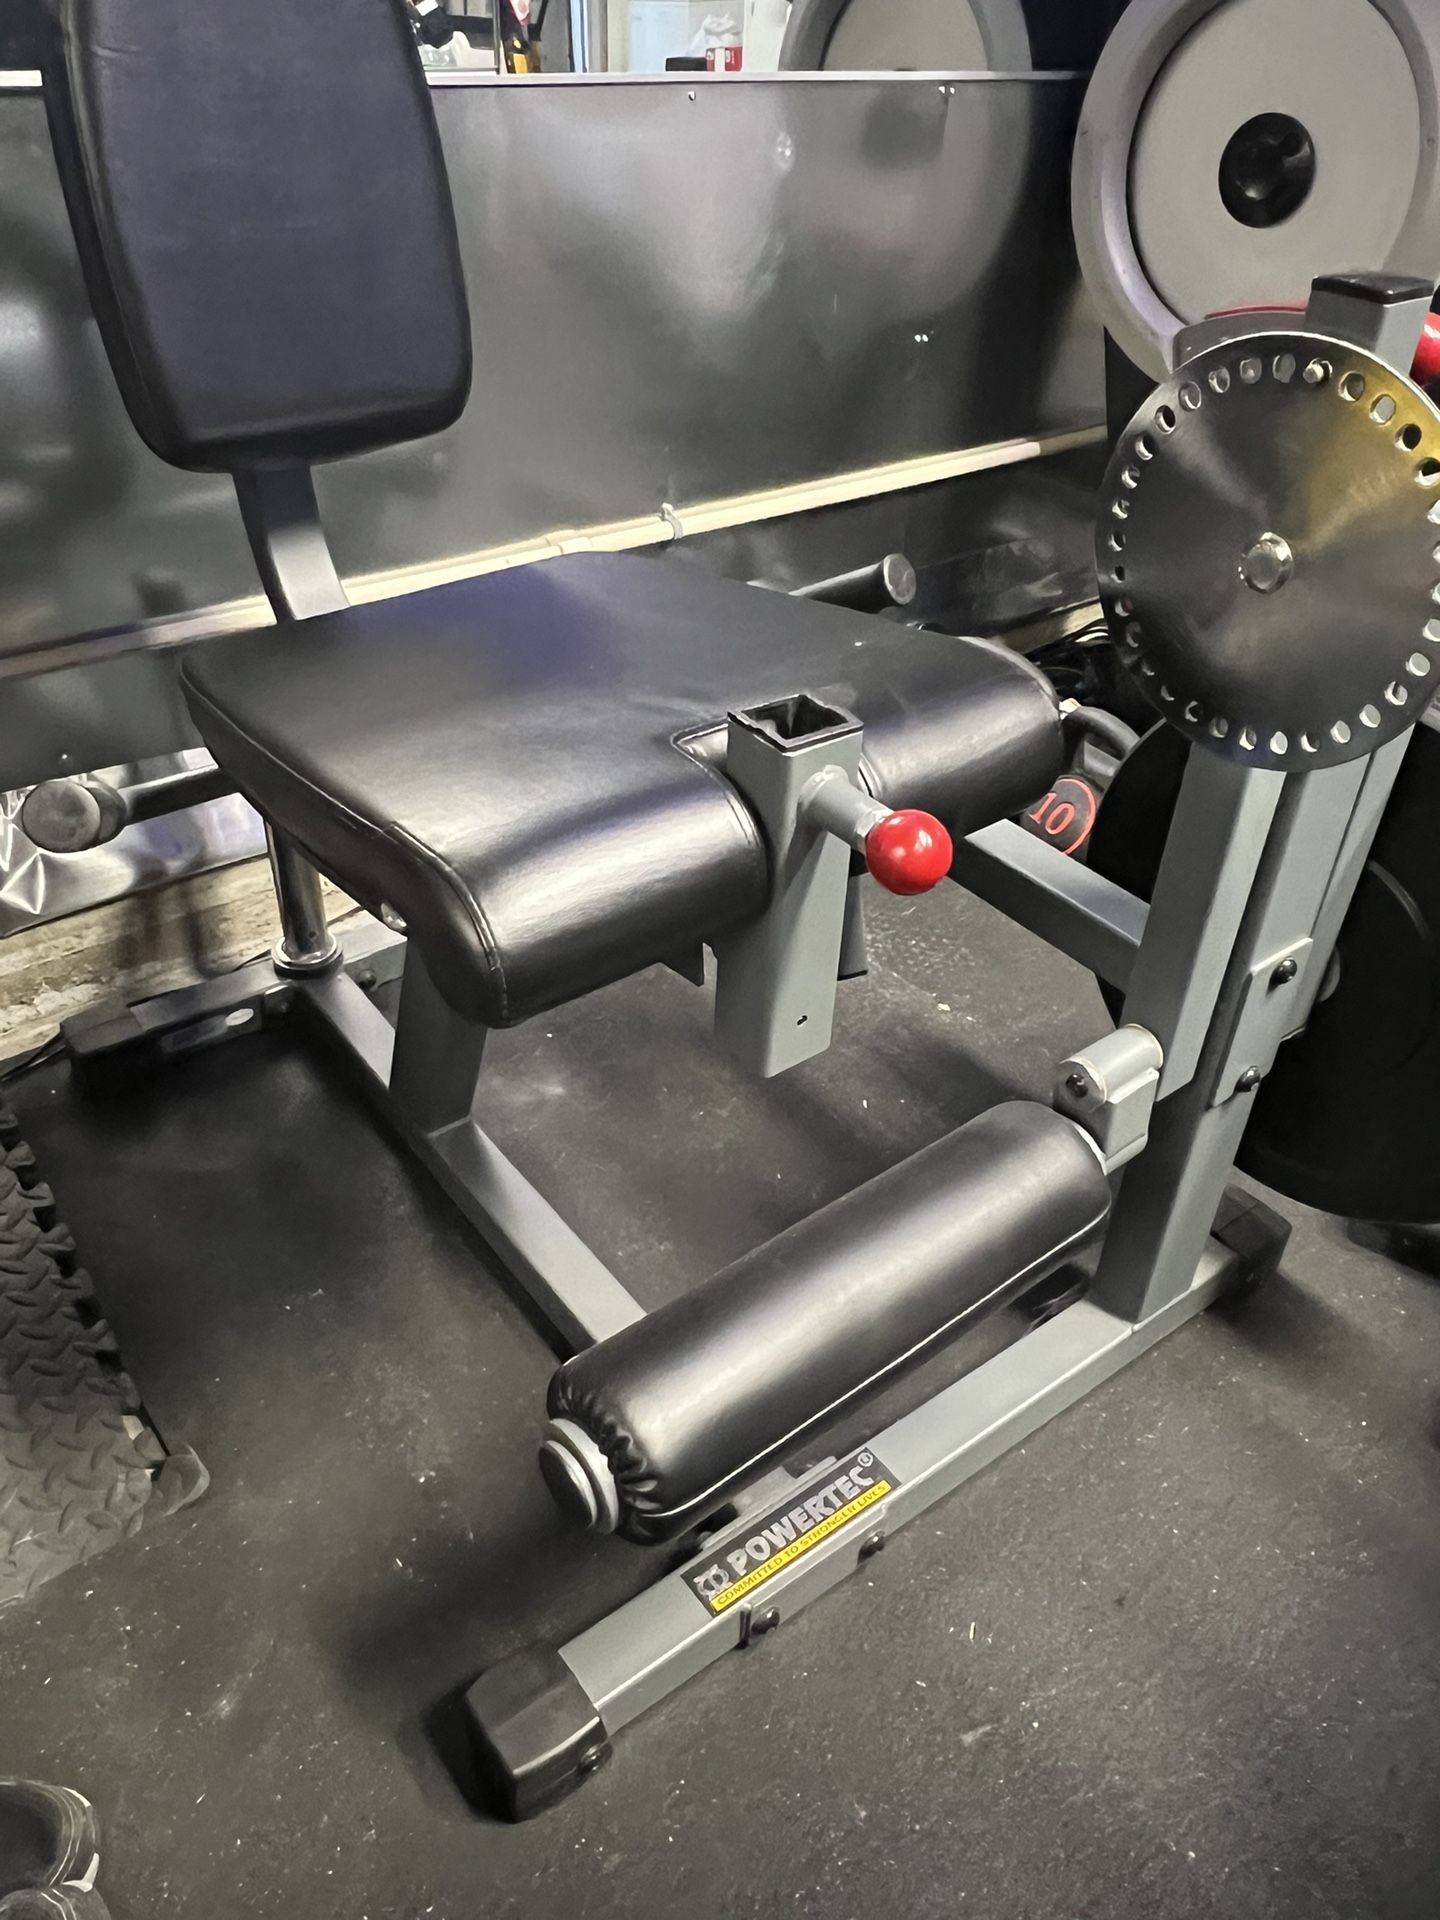  Leg Extension Curl Machine/40 Lbs. W/collars Included